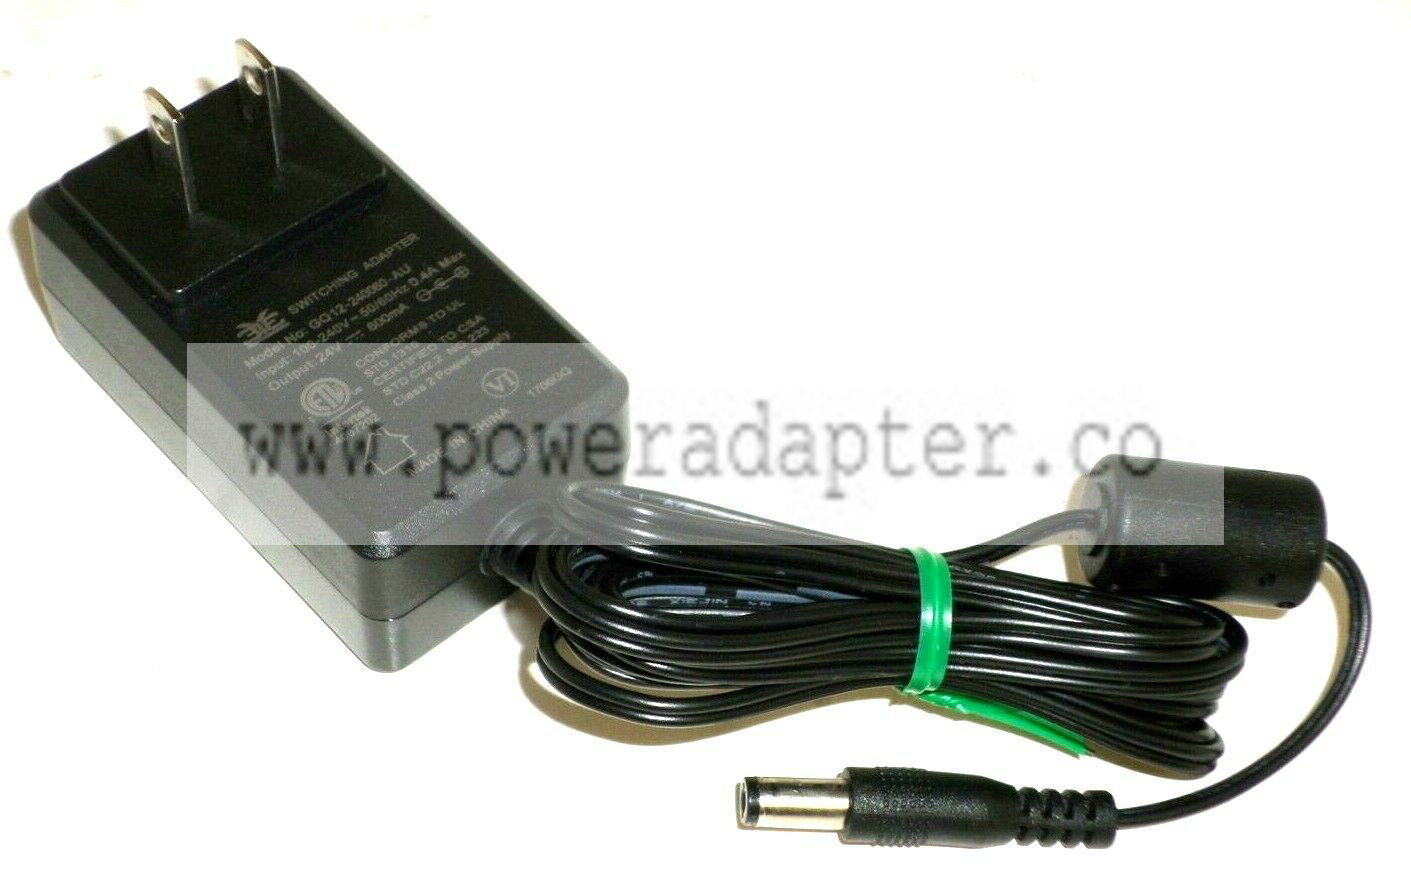 3YE Switching Power Supply Adapter 24V 600mA Model GQ12-240060-AU MPN: GQ12-240060-AU Brand: 3YE UPC: Does not app - Click Image to Close